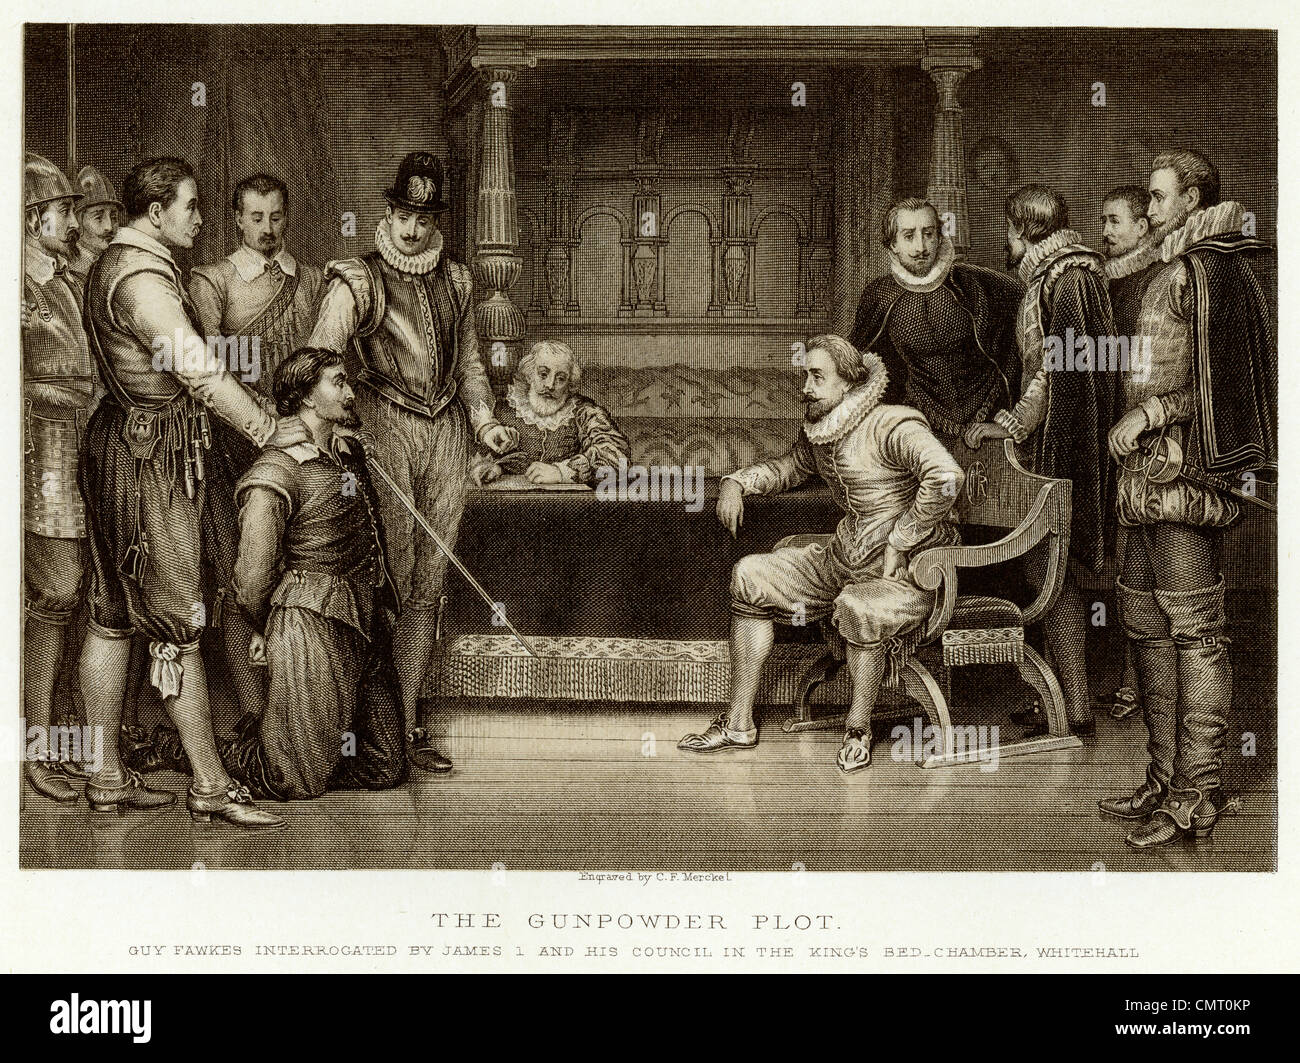 The Gunpowder Plot, Guy Fawkes interrogated by James I and his Council in the Kings Bed Chamber Whitehall Stock Photo